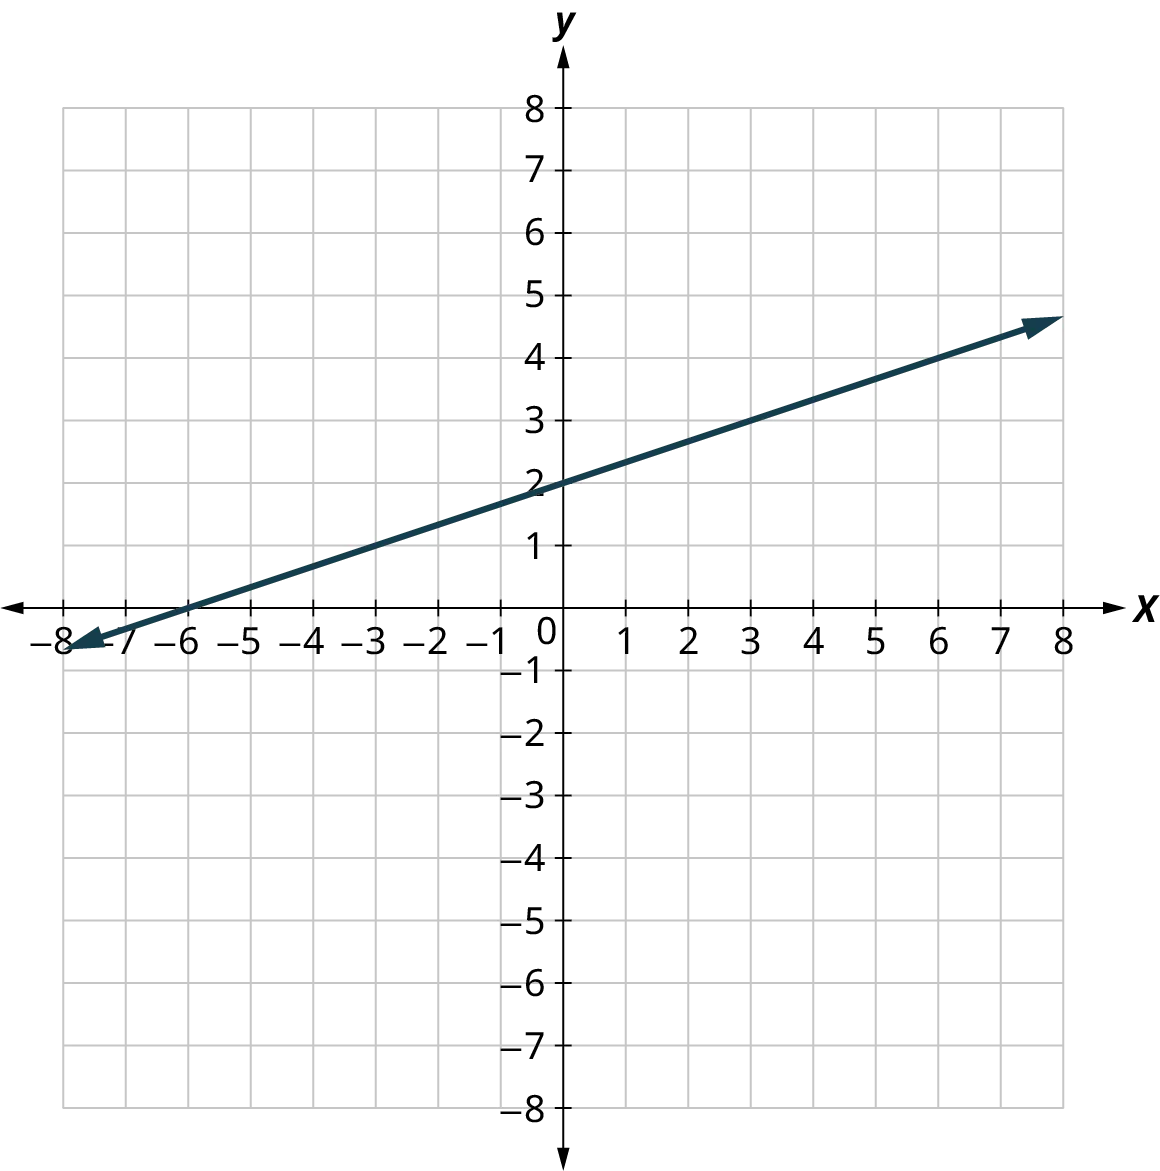 A line is plotted on an x y coordinate plane. The x and y axes range from negative 8 to 8, in increments of 1. The line passes through the points, (negative 6, 0), (0, 2), and (6, 4).